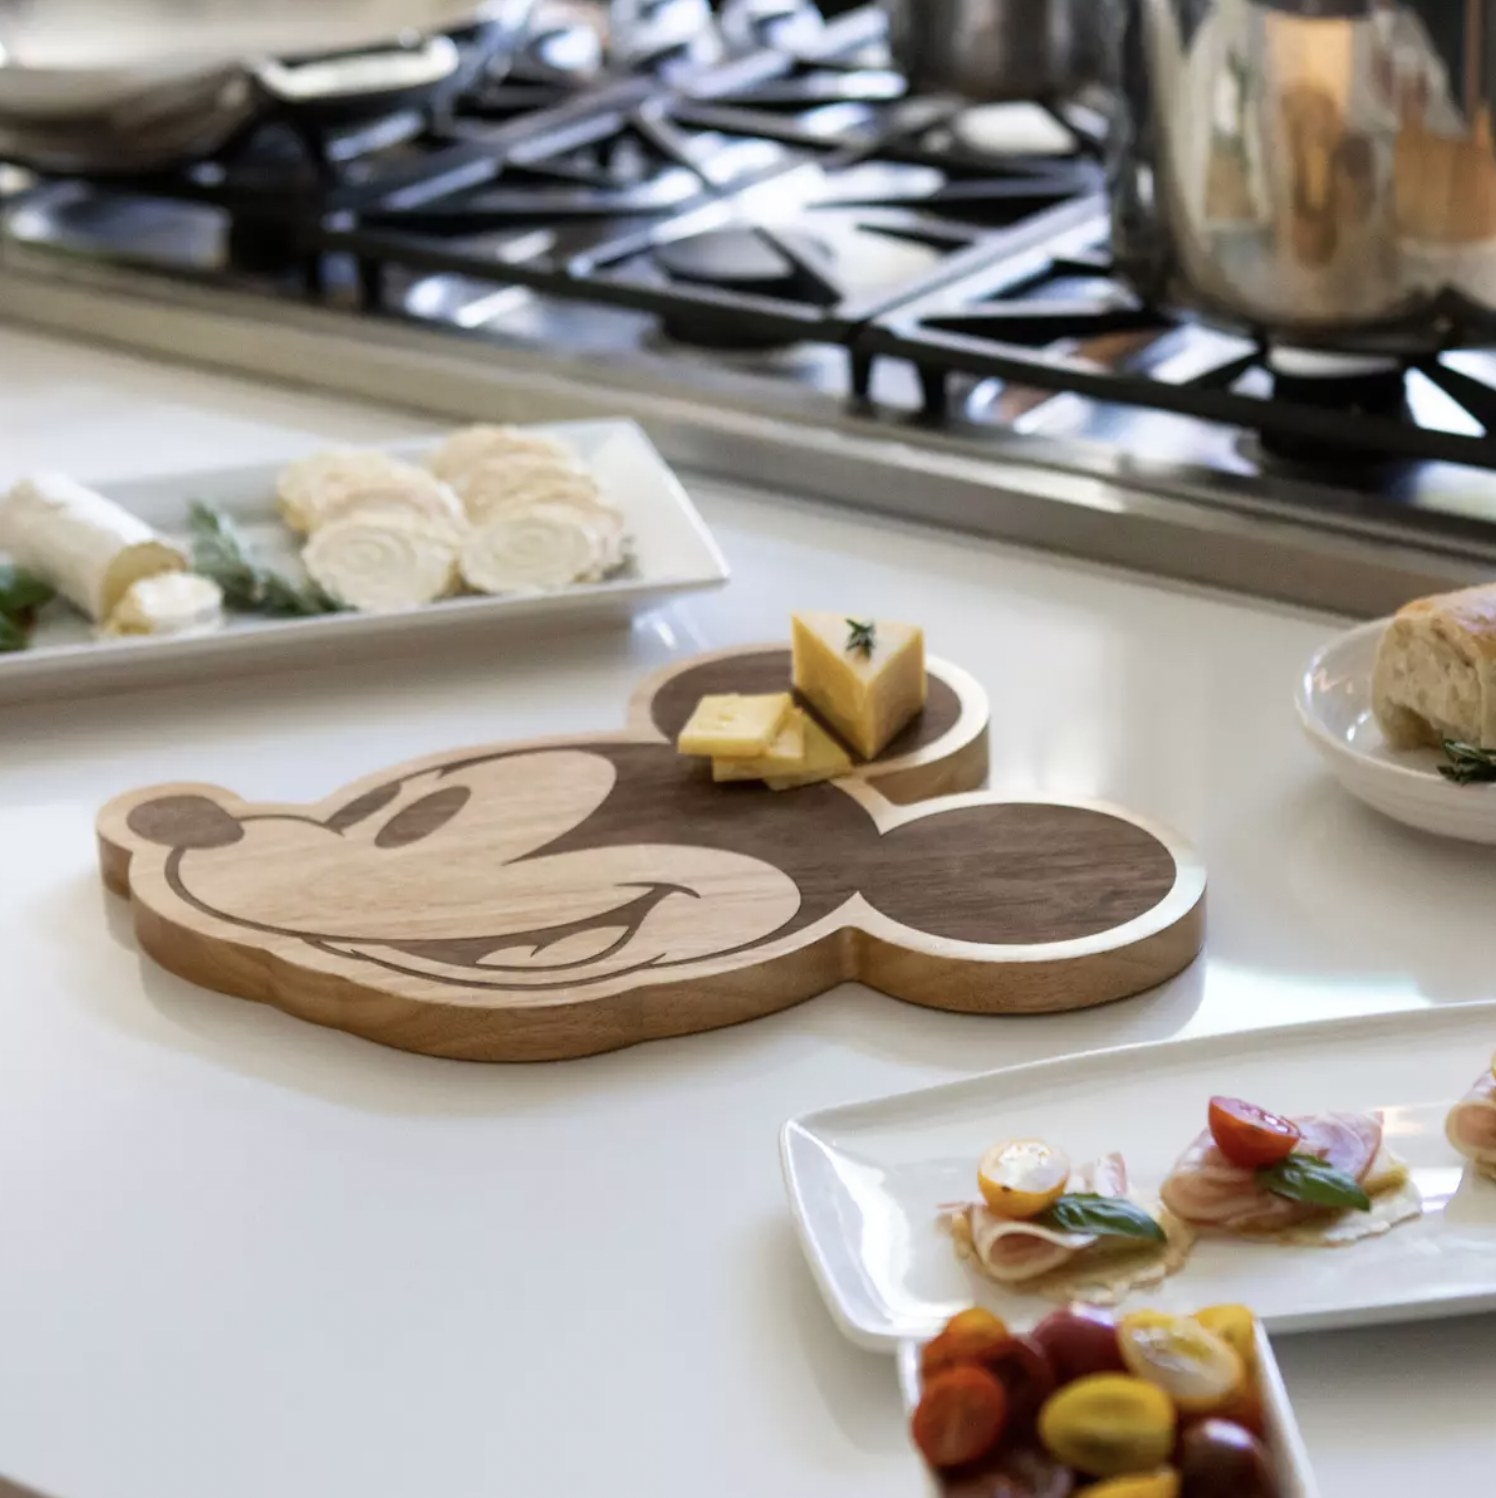 The cutting board with cheese wedge and slices on one ear amongst other platters of snacks on counter